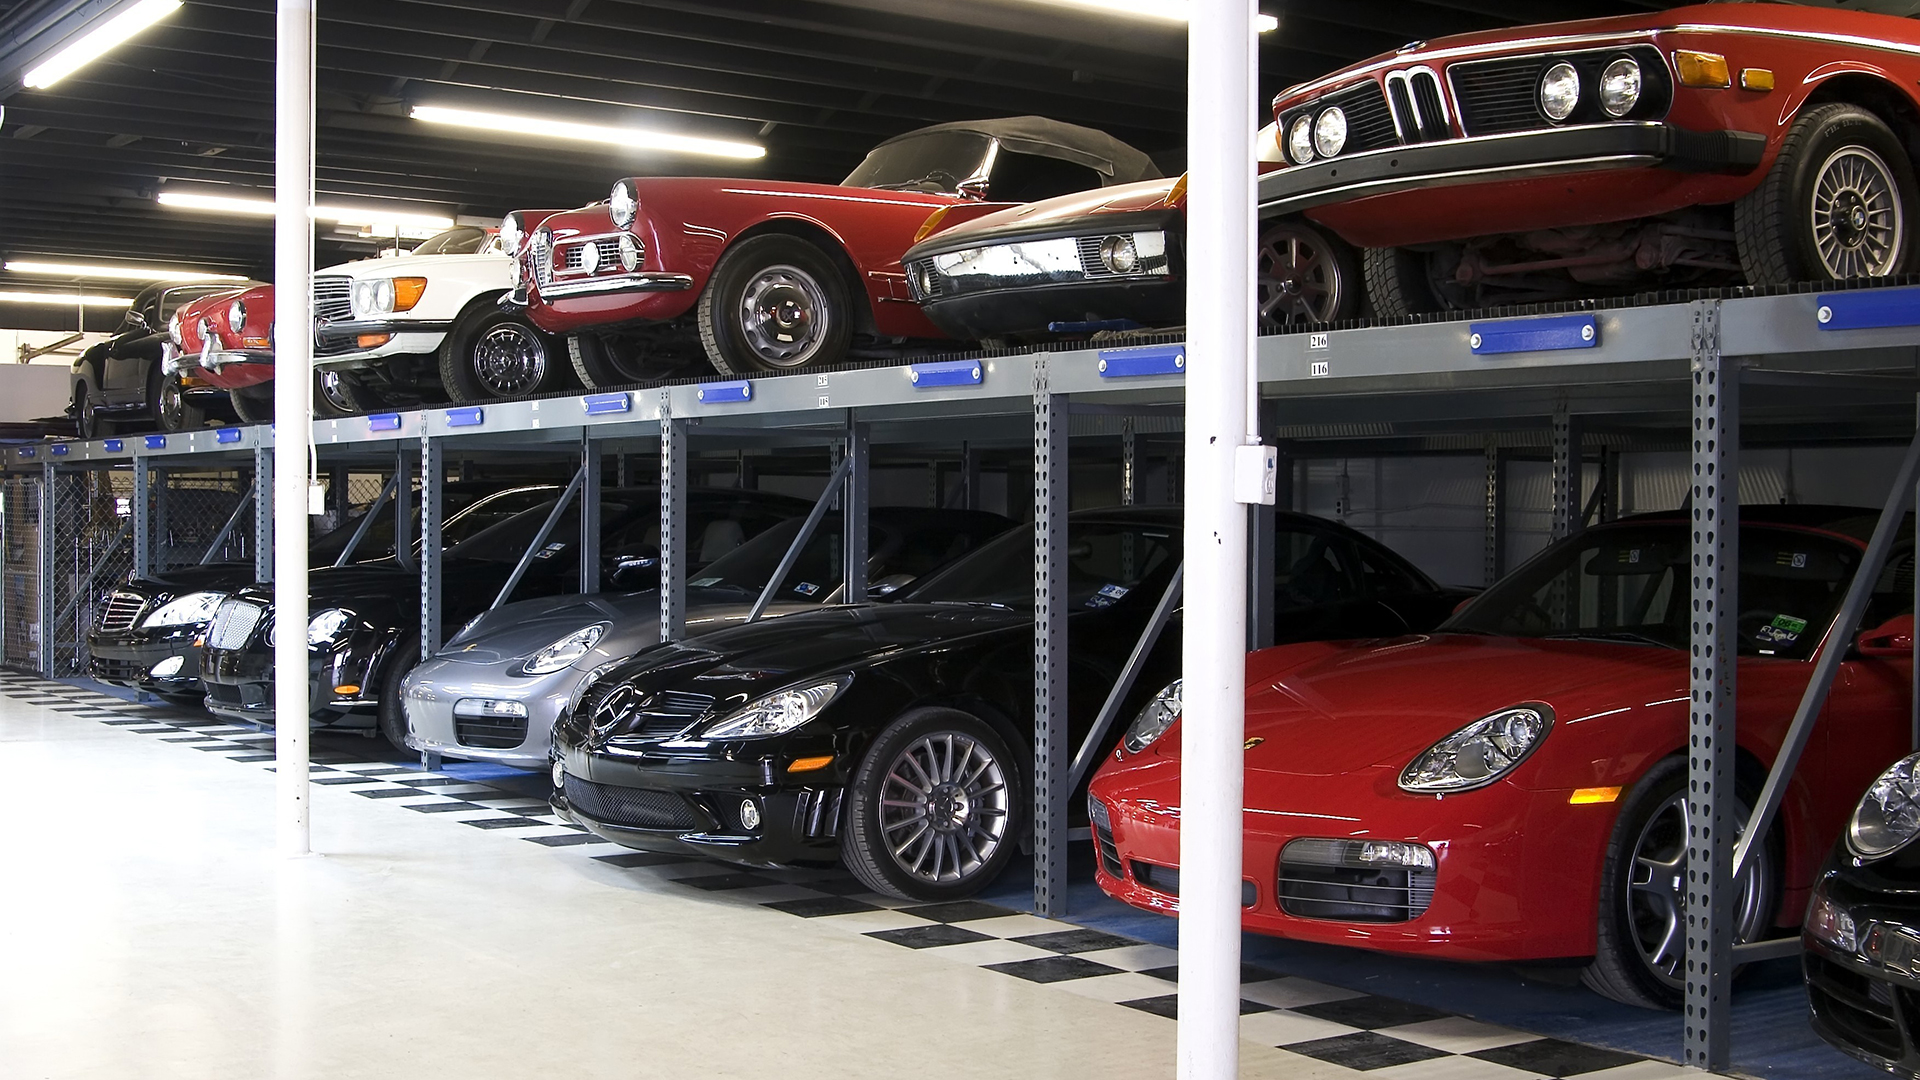 The Car Warehouse - A different kind of company, a different kind